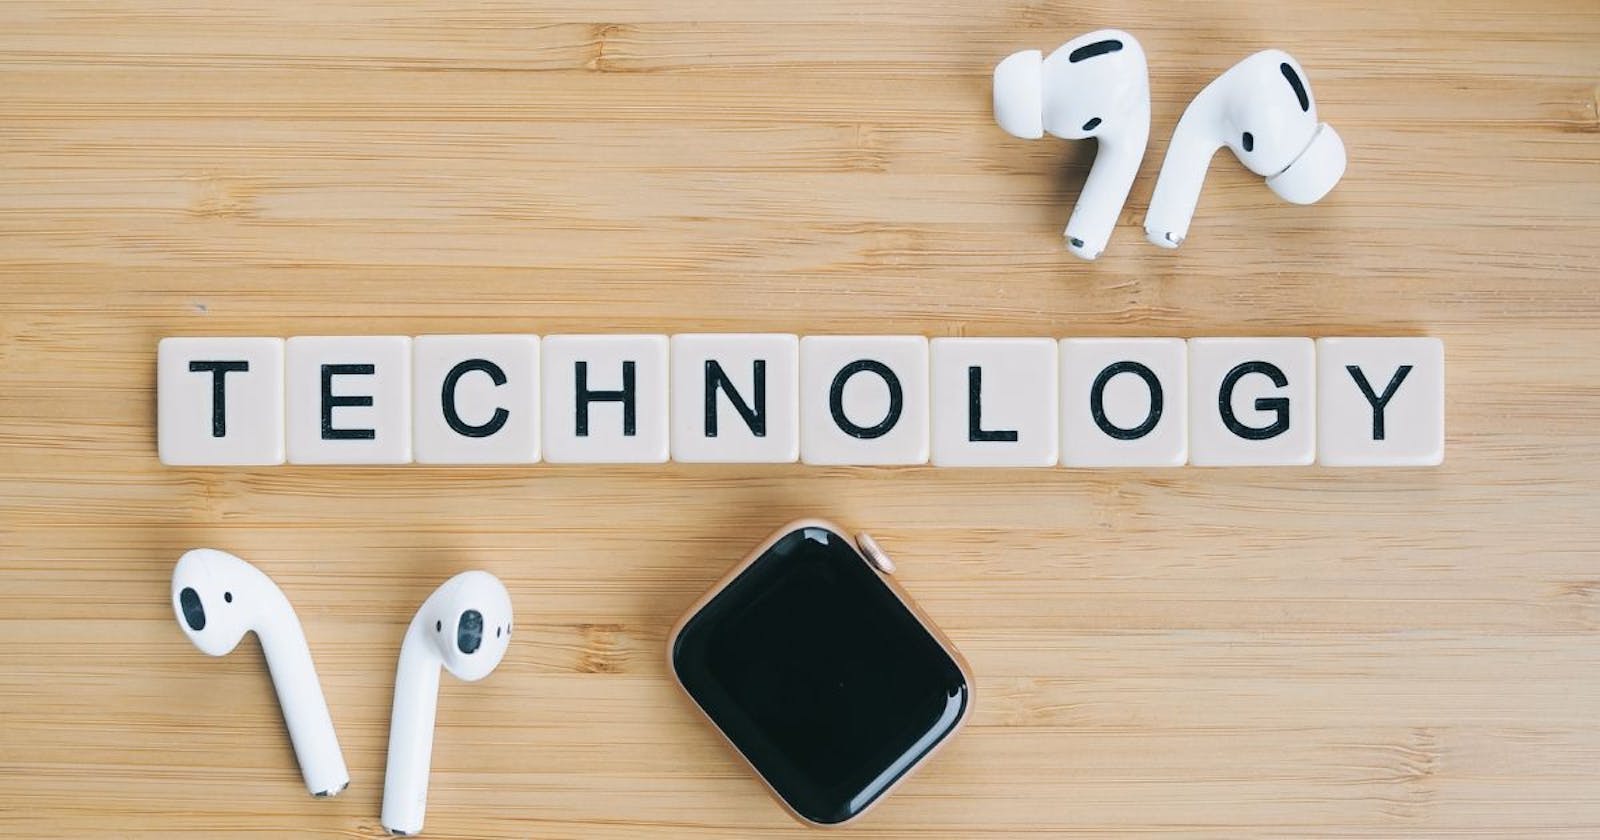 Non-Technical Careers: An Insider’s Look Into The Tech Industry